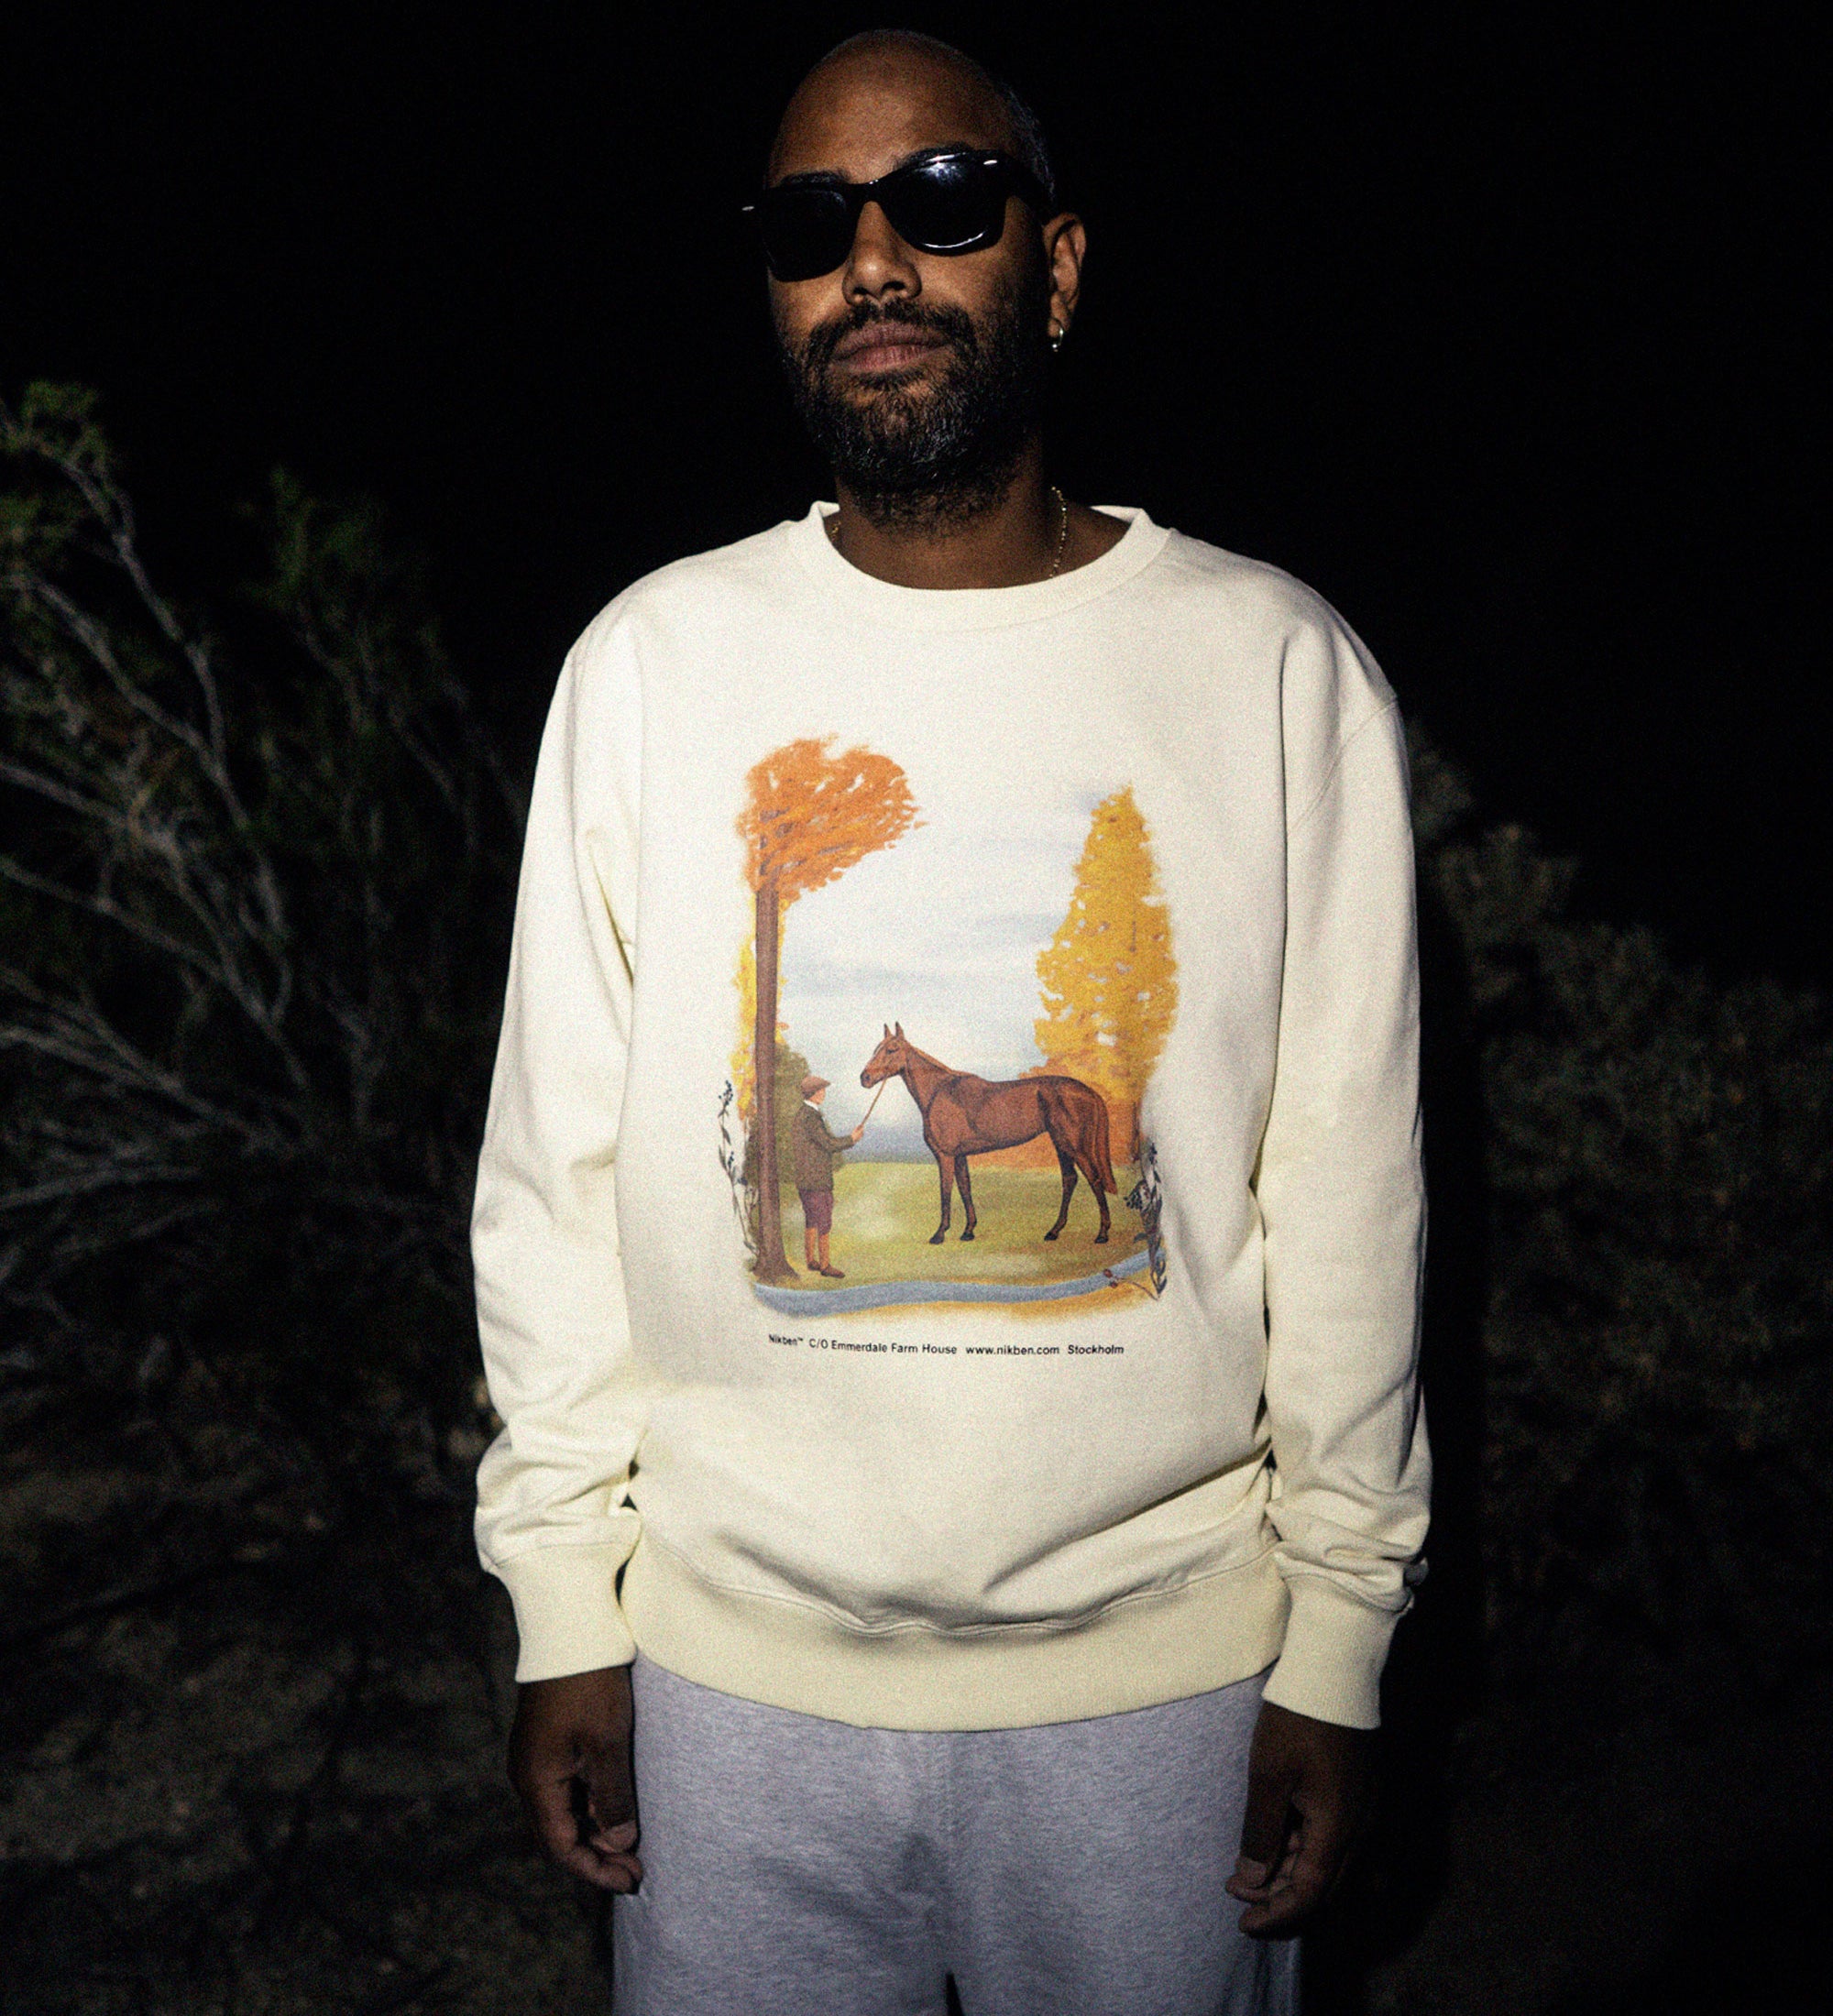 Male model wearing a cream colored sweatshirt with a man and a horse print.